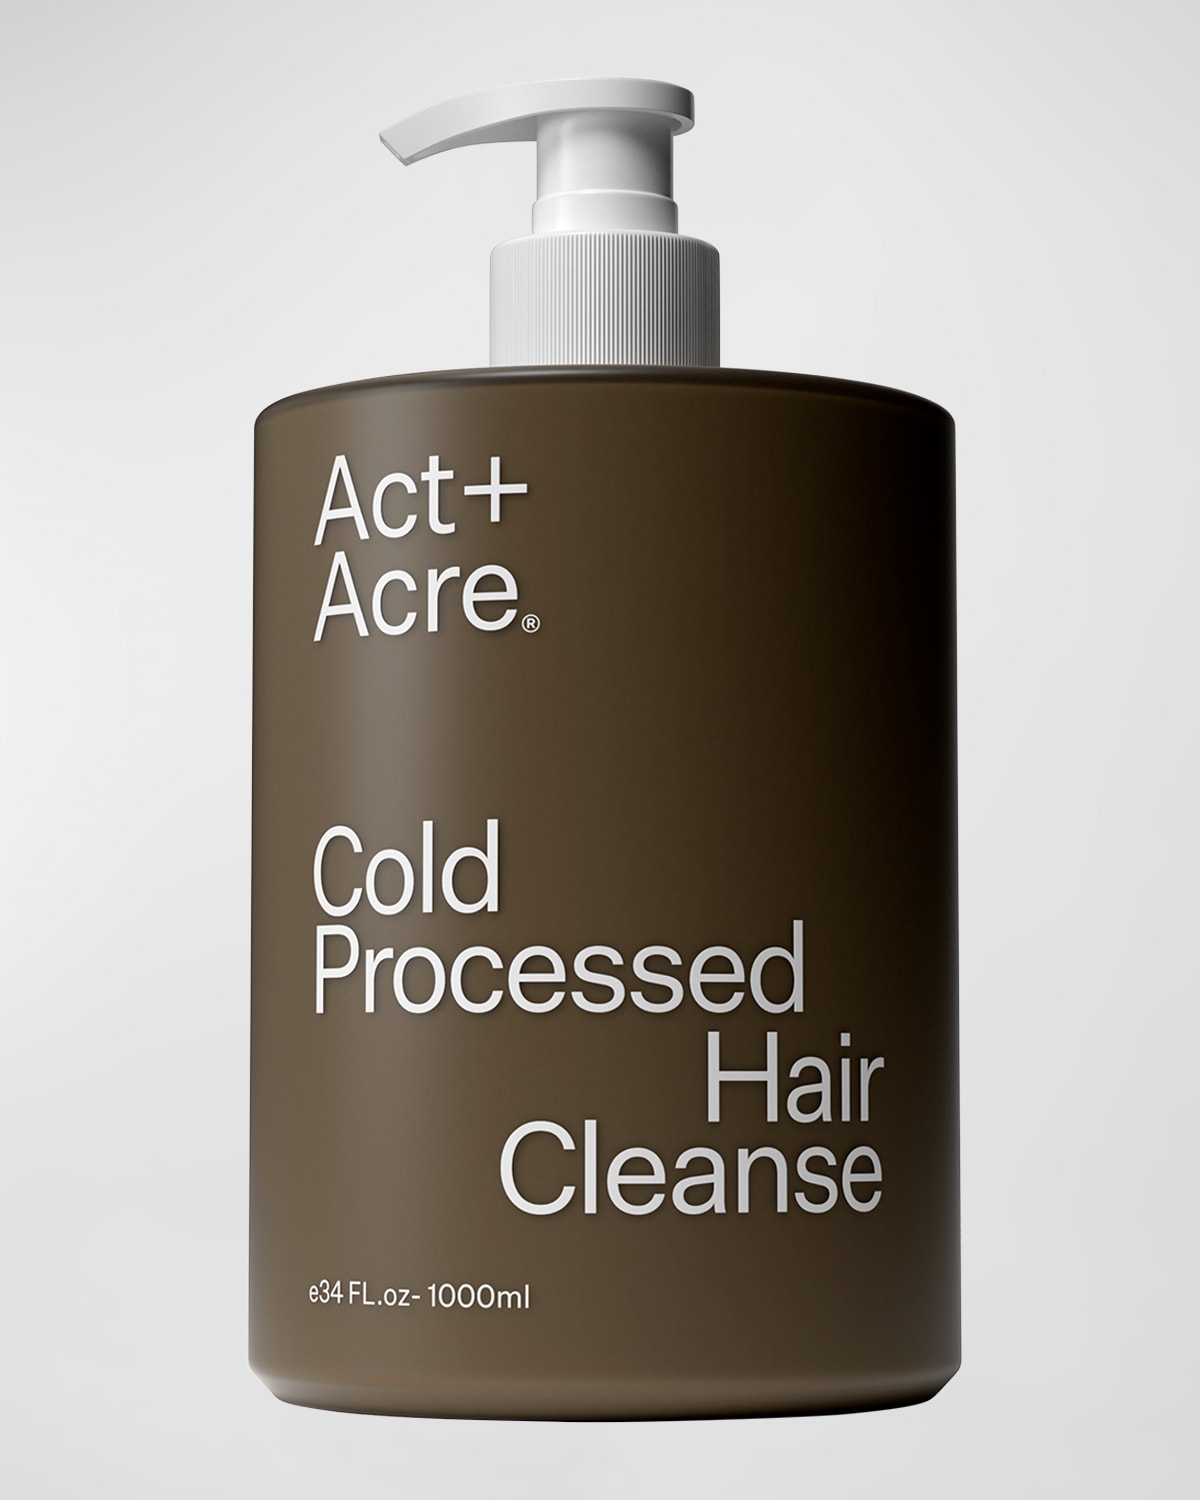 Cold Processed Hair Jumbo Cleanse, 34 oz.